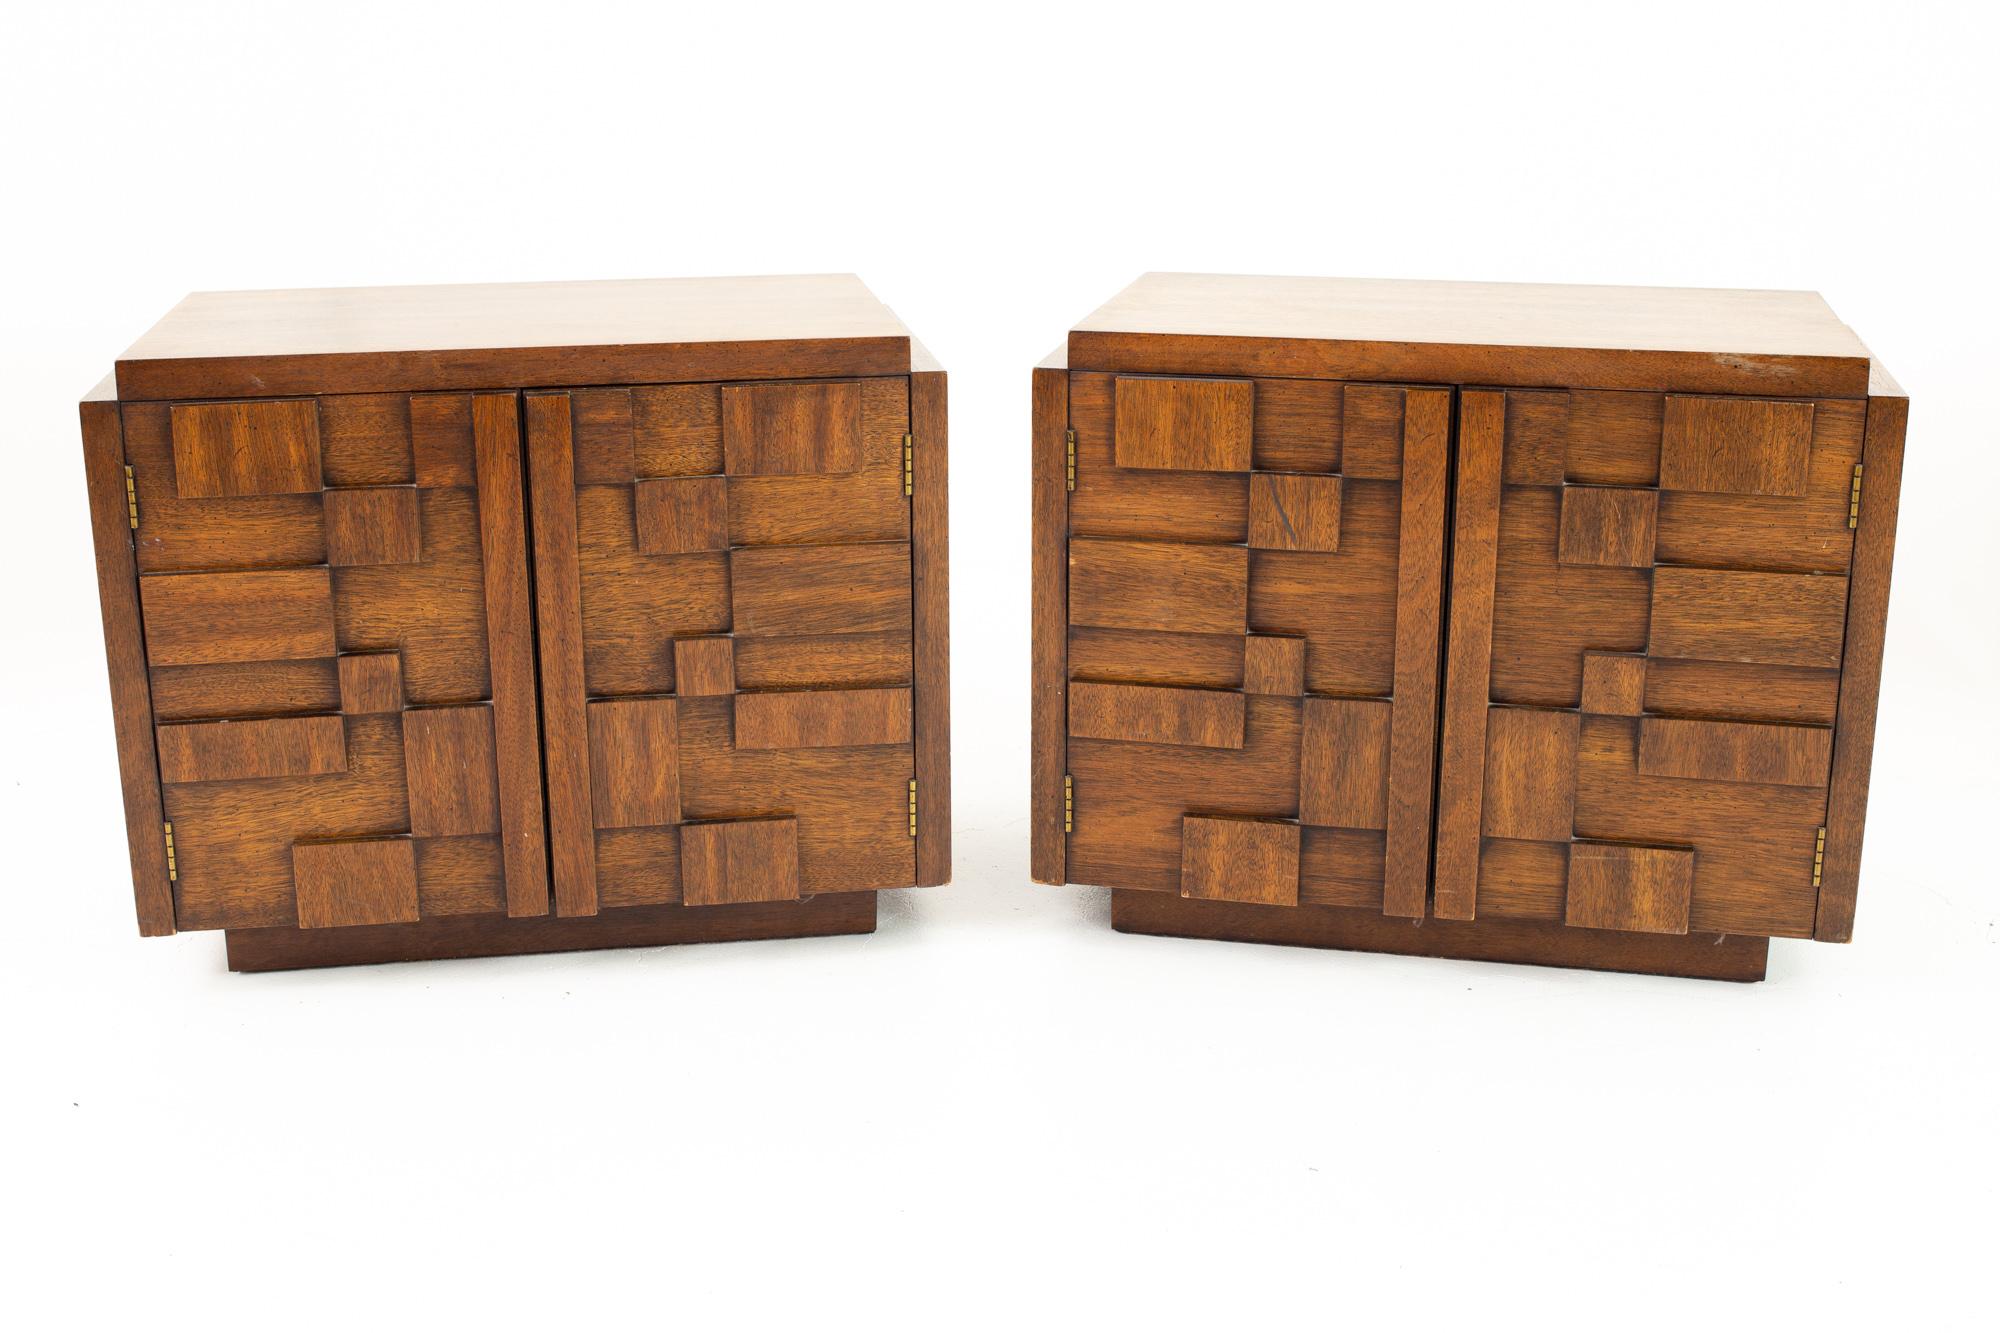 Paul Evans style Lane mid century Brutalist nightstand side end tables - pair 
Each nightstand measures: 28 wide x 16.5 deep x 22.25 inches high

?All pieces of furniture can be had in what we call restored vintage condition. That means the piece